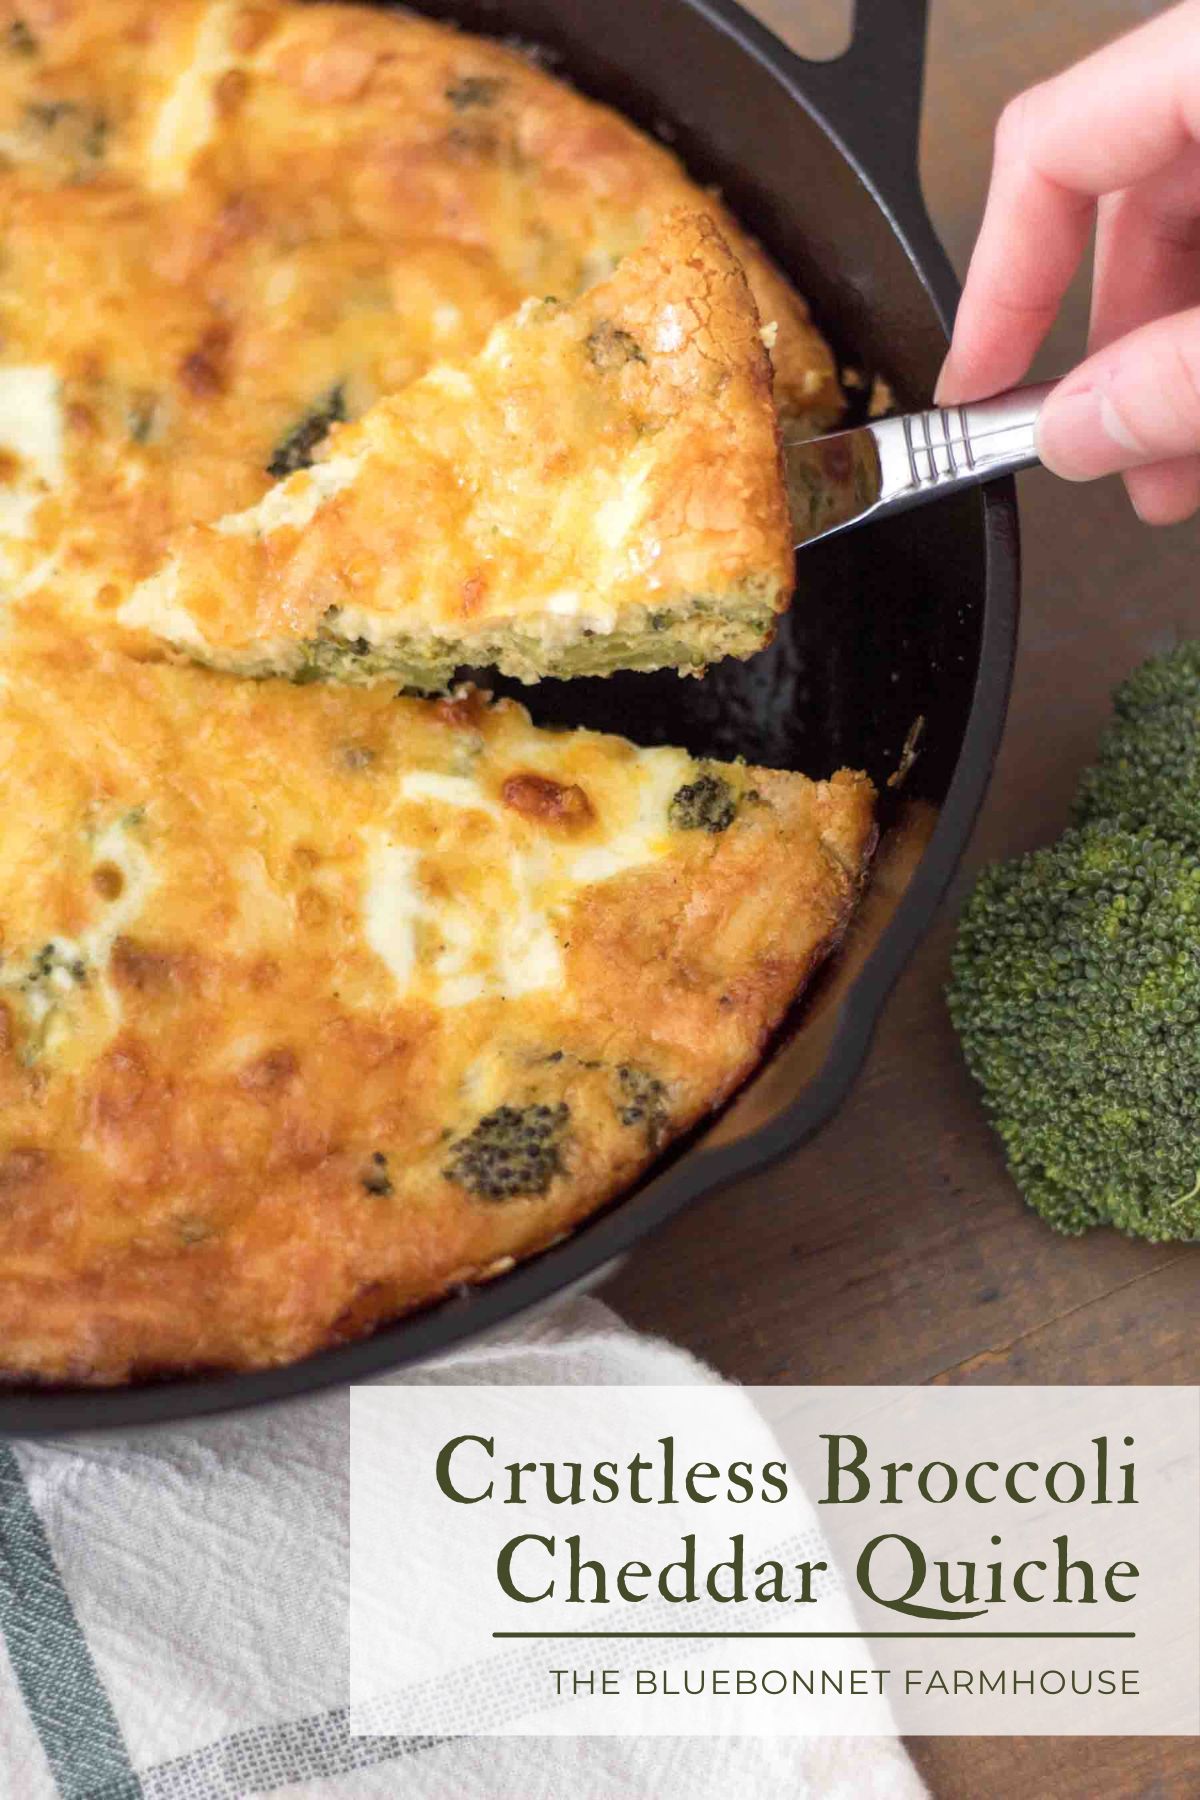 slice of broccoli cheese crustless quiche being served out of a cast iron skillet. text reads "crustless broccoli cheddar quiche"